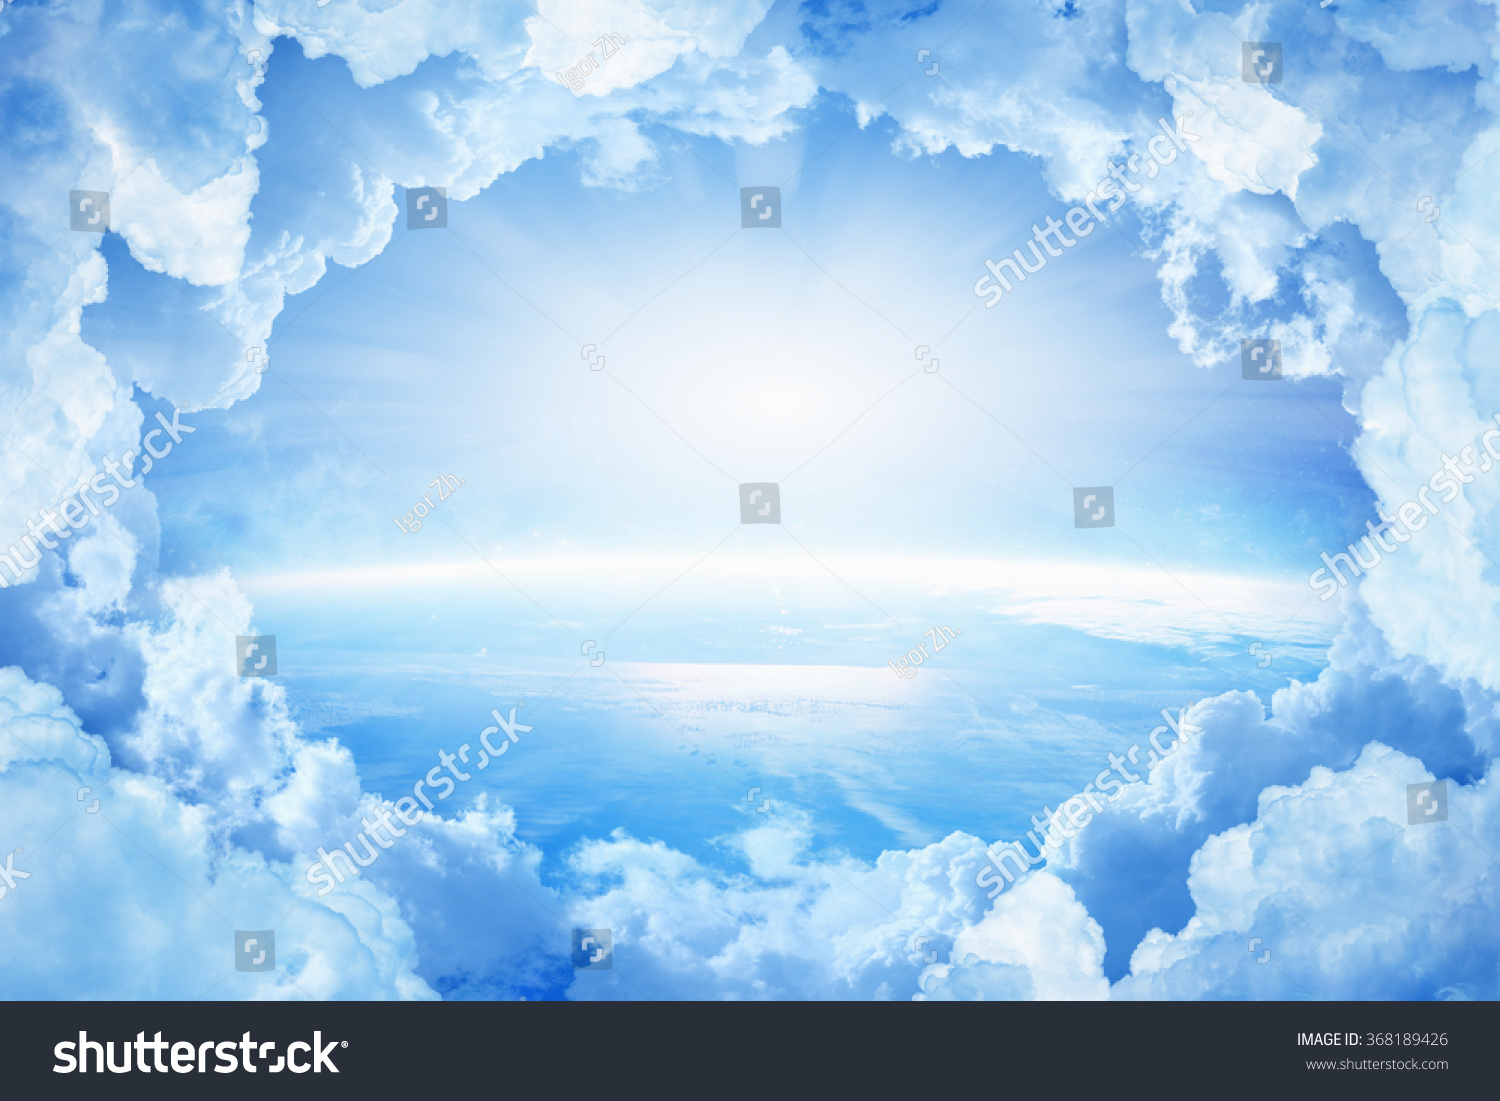 Light from heaven, blue planet Earth in white clouds, bright sunlight from above. Elements of this image furnished by NASA nasa.gov #368189426